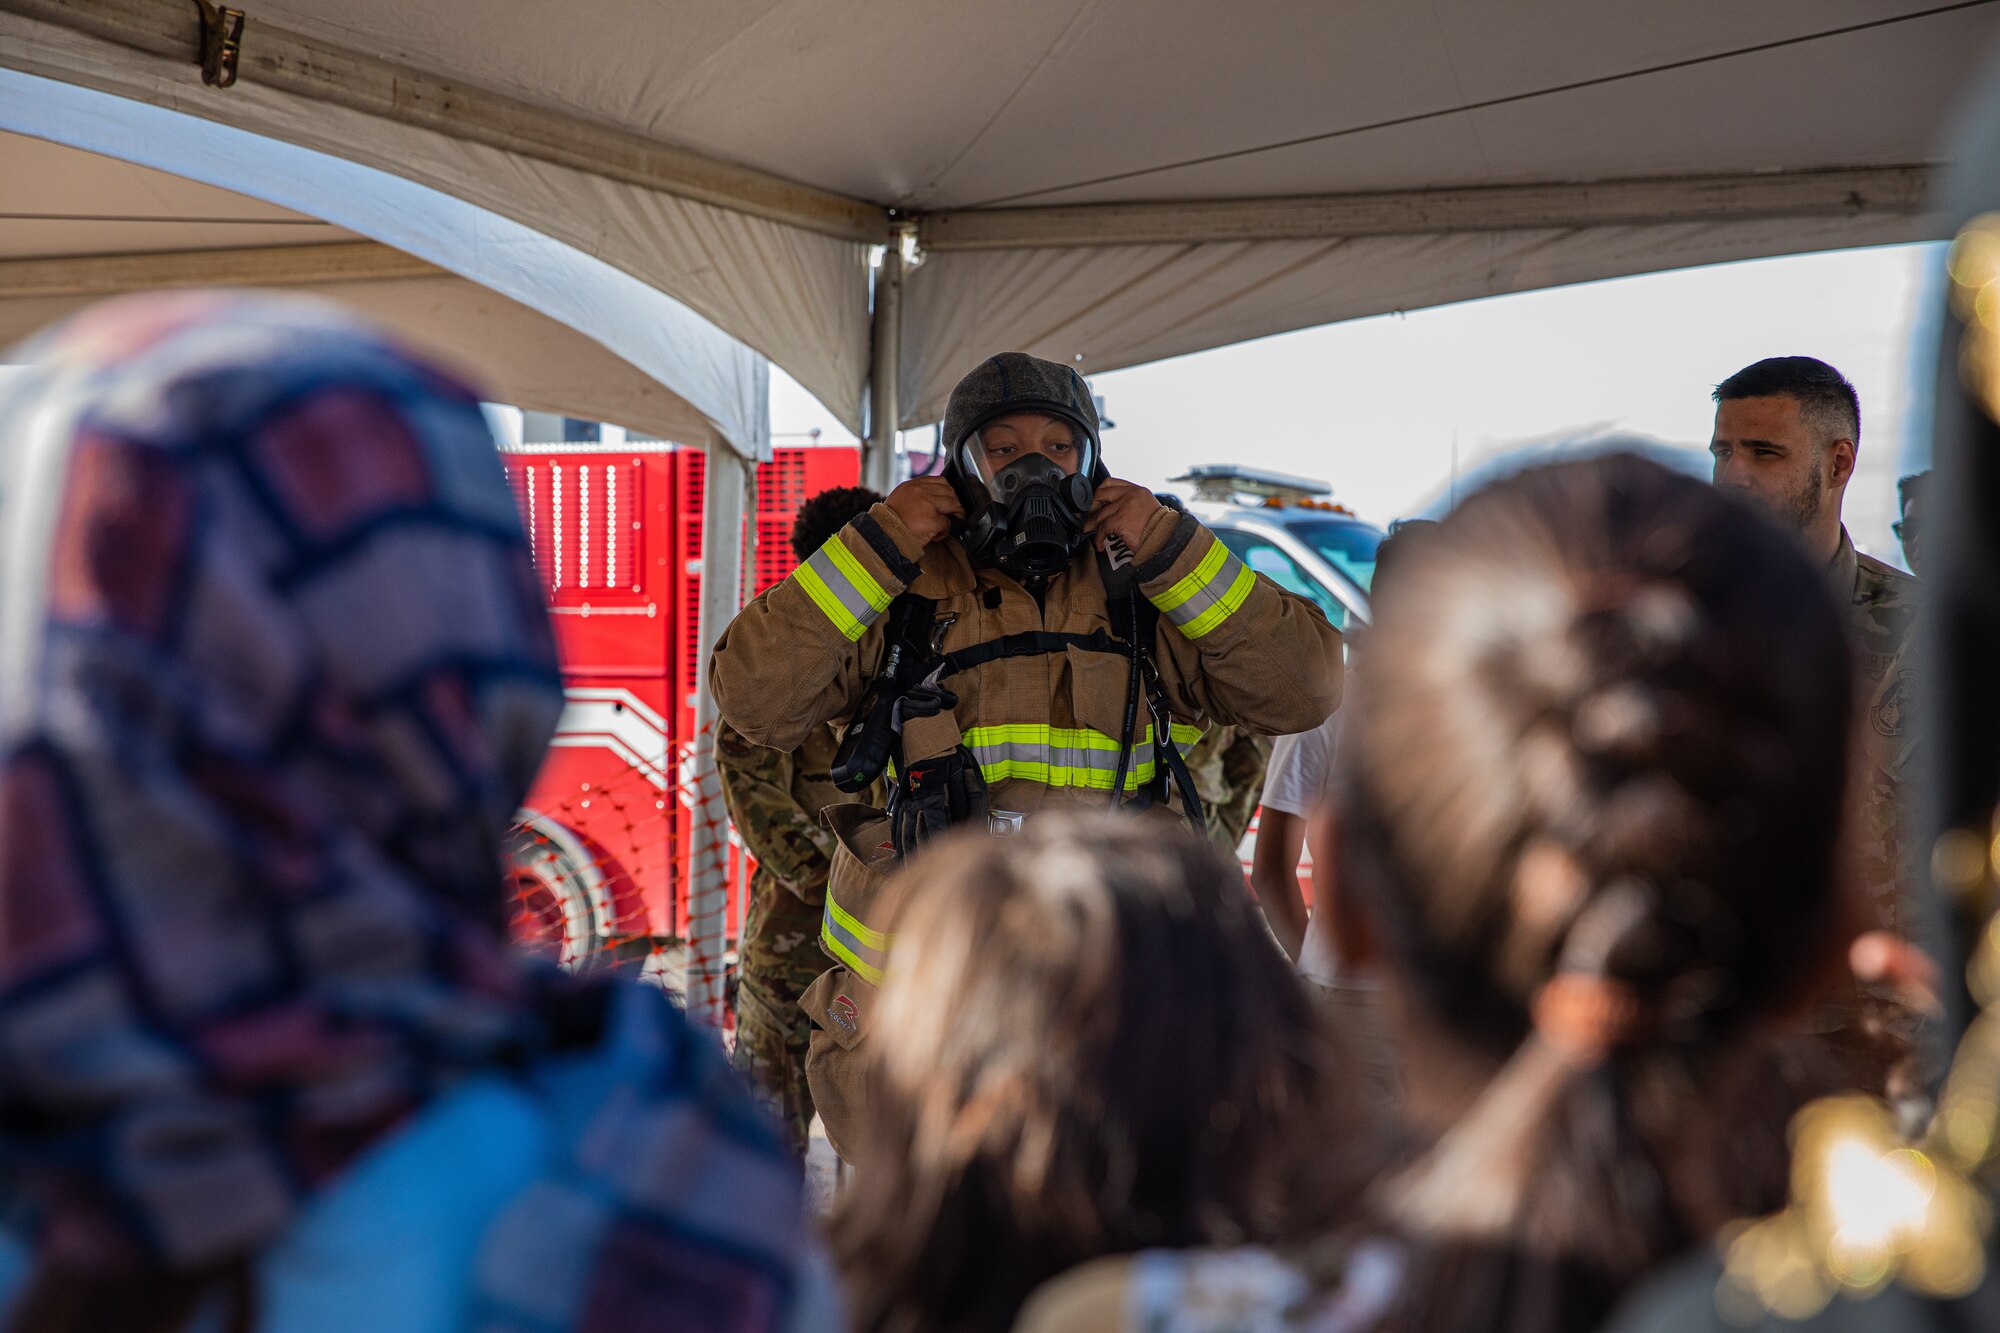 Airman 1st Class Justice Smith, Task Force-Holloman firefighter deployed from Seymour Johnson Air Force Base, North Carolina, demonstrates the proper wear of firefighter gear as well as giving a fire safety class to younger Afghan evacuees on Holloman Air Force Base, New Mexico, Oct. 11, 2021. The Department of Defense, through U.S. Northern Command, and in support of the Department of Homeland Security, is providing transportation, temporary housing, medical screening, and general support for at least 50,000 Afghan evacuees at suitable facilities, in permanent or temporary structures, as quickly as possible. This initiative provides Afghan personnel essential support at secure locations outside Afghanistan. (U.S. Army photo by Pfc. Anthony Sanchez)